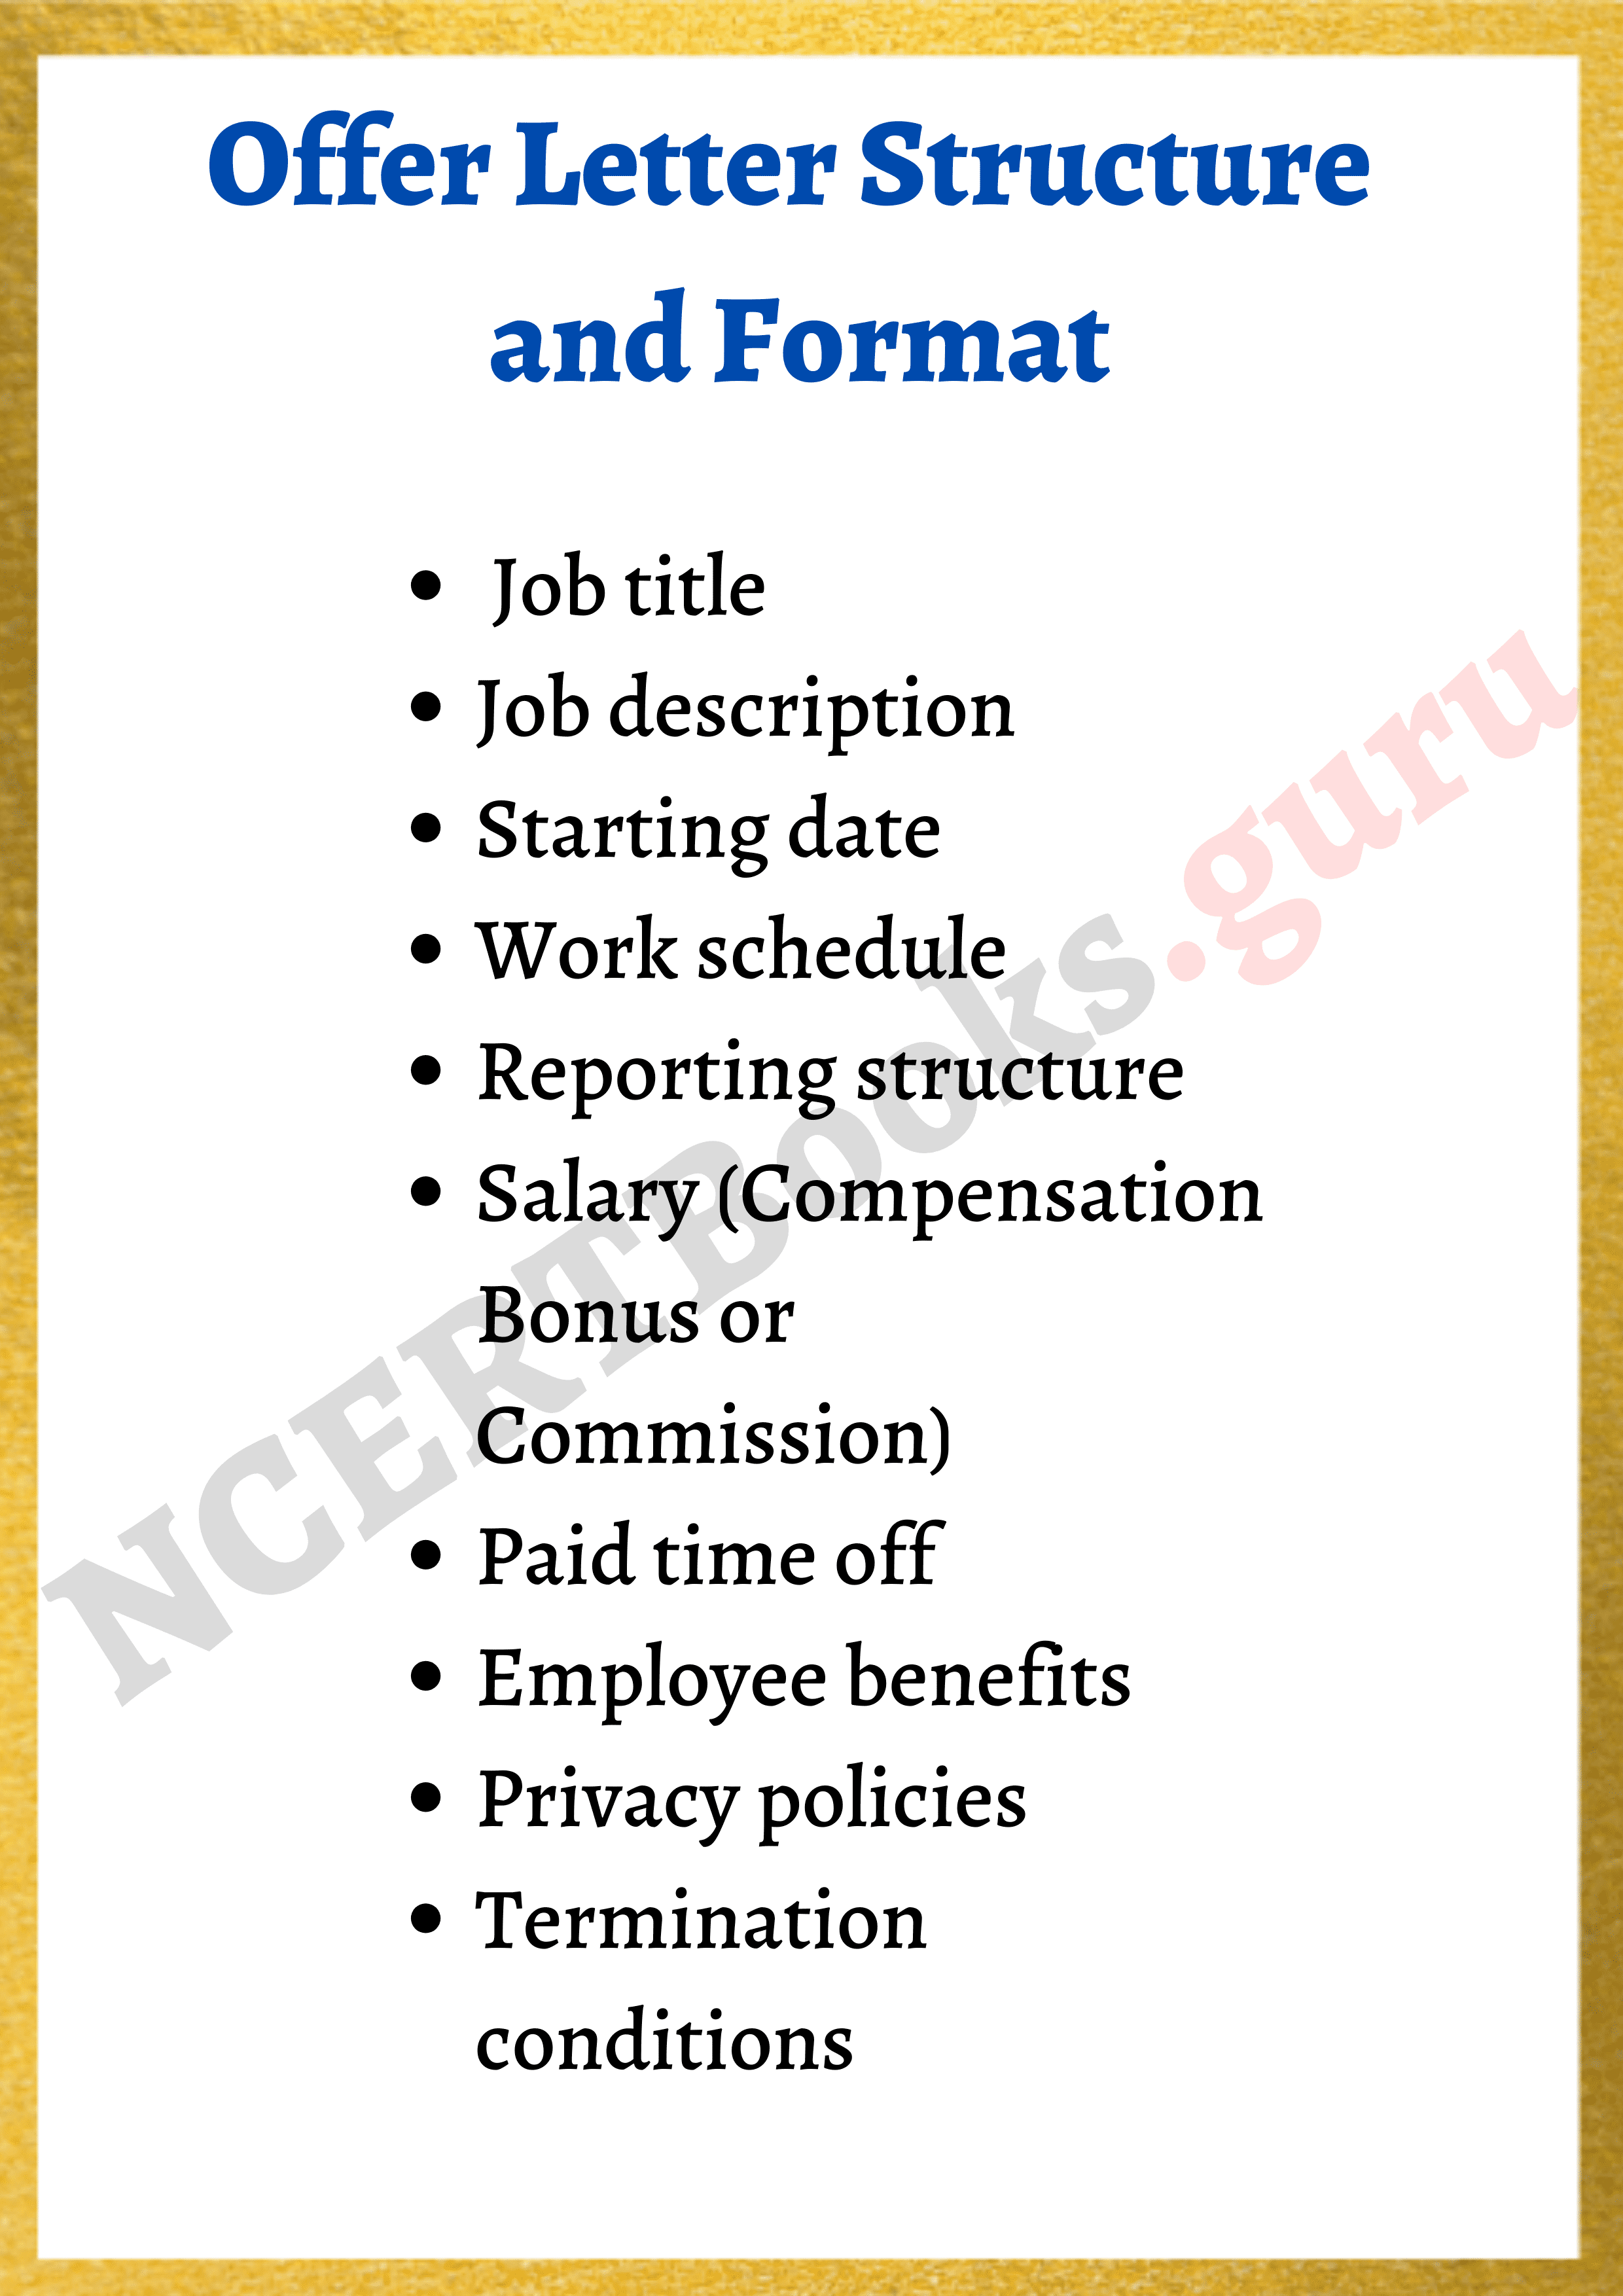 Offer Letter Structure and Format